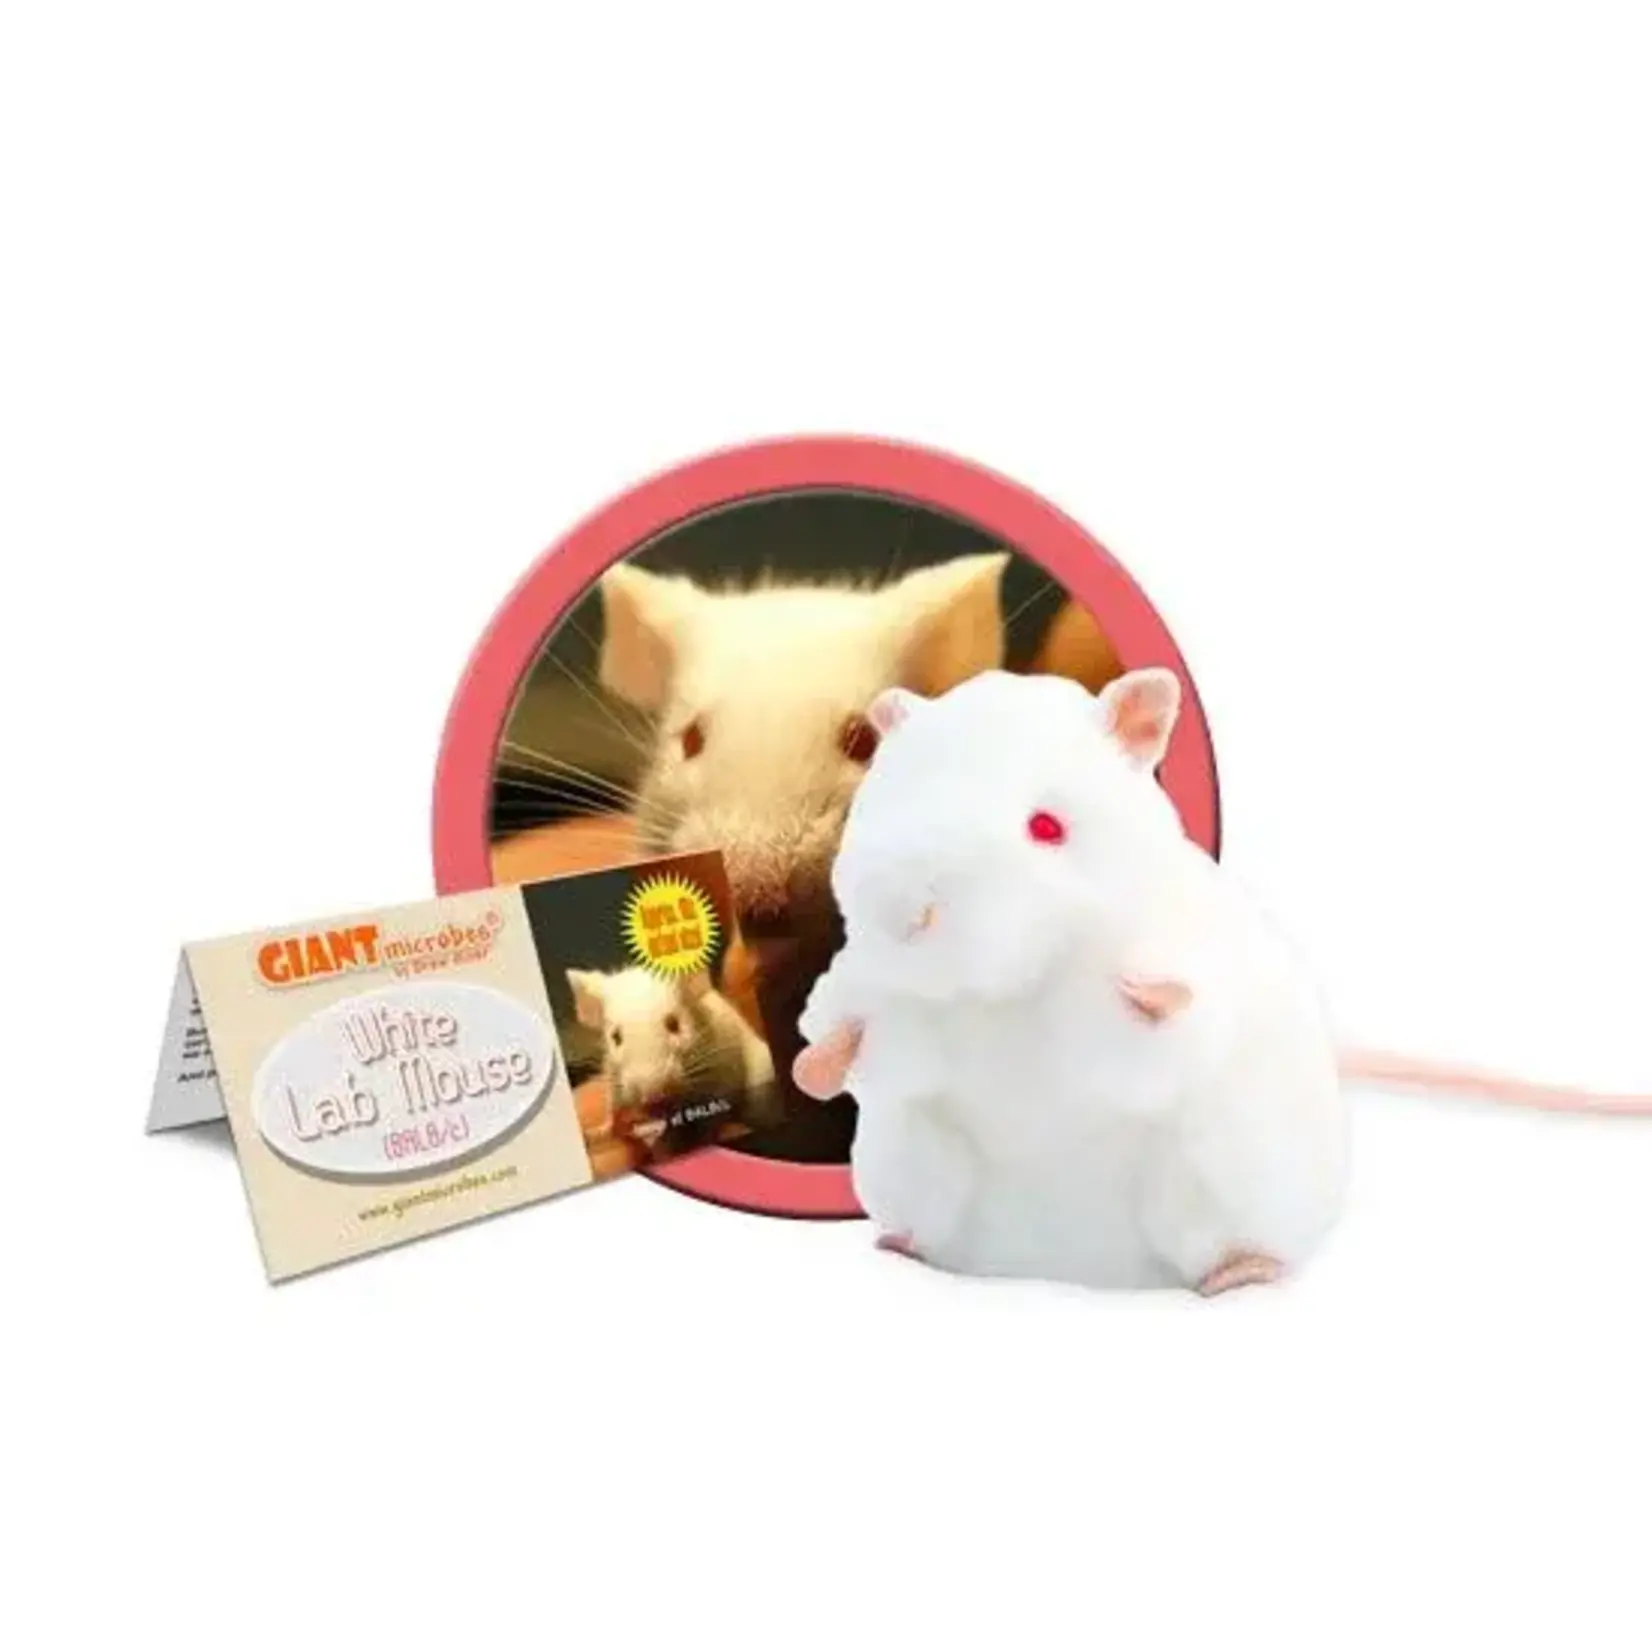 Giant Microbes White Lab Mouse